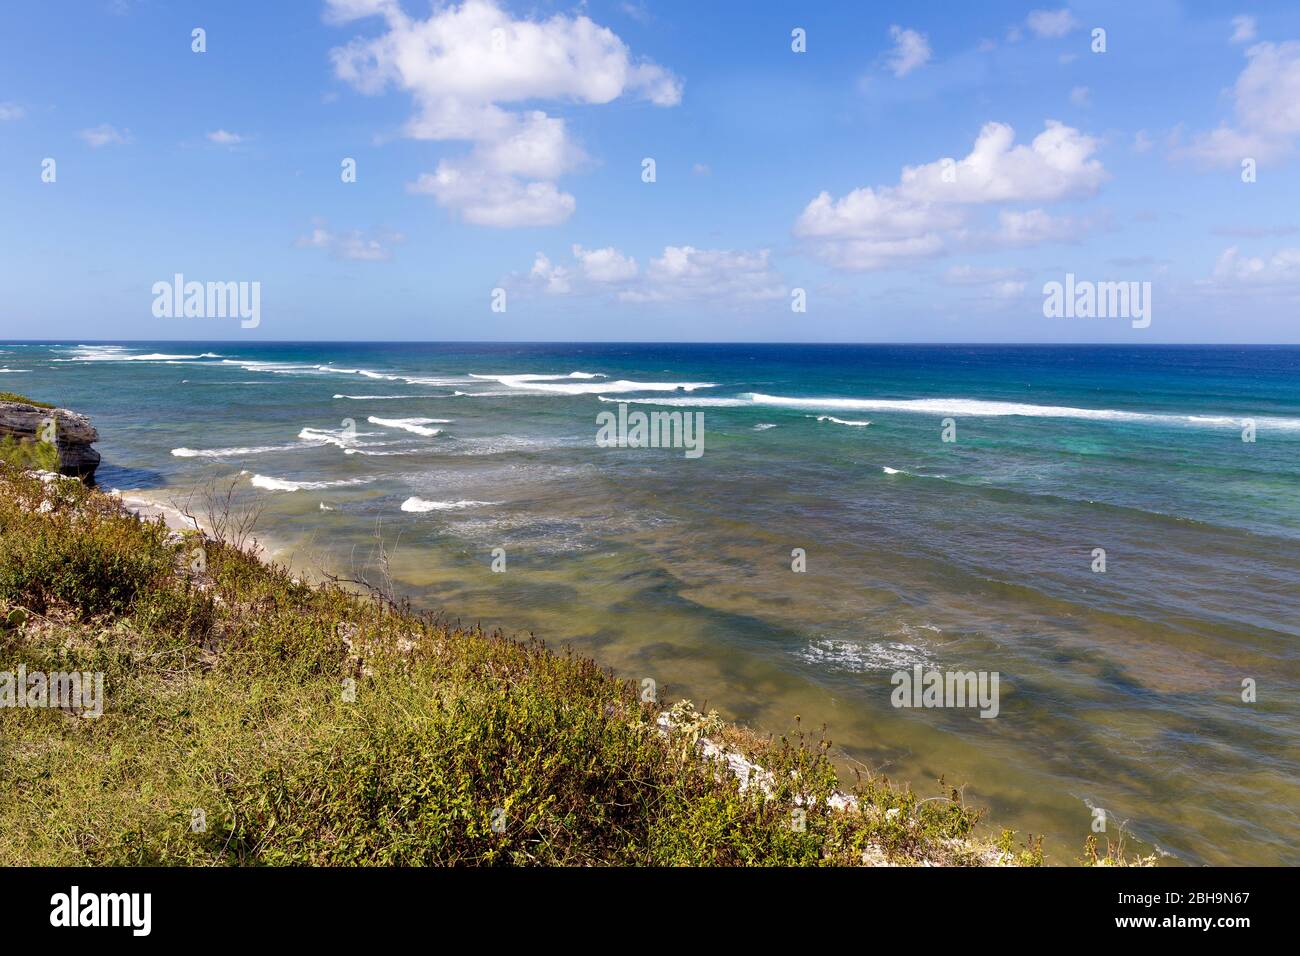 Northern tip of the island, Grand Turk Island, Turks and Caicos Islands, Central America Stock Photo